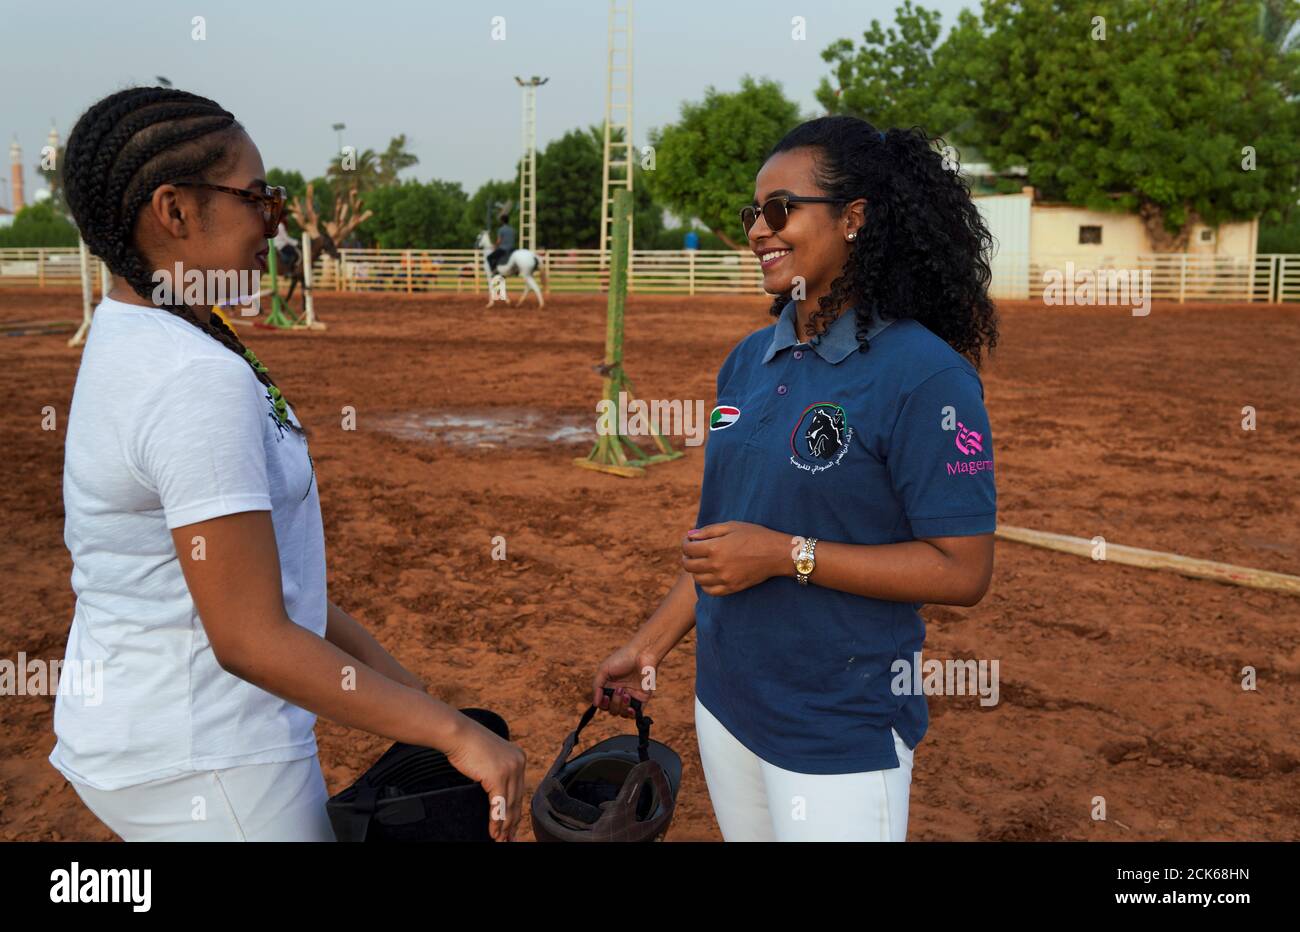 Rayan (L), 24, and her friend Sagda, 24, chat before horse riding at the Equestrian Club, in Khartoum, Sudan, July 2, 2019. Rayan has been riding for 13 years. She was a gymnast and had a show at the club, where she saw horses and decided she wanted to ride. She is also a football player. Sagda, a journalist and club member who had been riding for 11 years, said: 'My mum brought me here, my family don't mind that I'm a woman riding. 'It can be a bit hard - some people disapprove at how we are dressed,' she added, alluding to tight-fitting equestrian garb. REUTERS/Andreea Campeanu  SEARCH 'CAMP Stock Photo